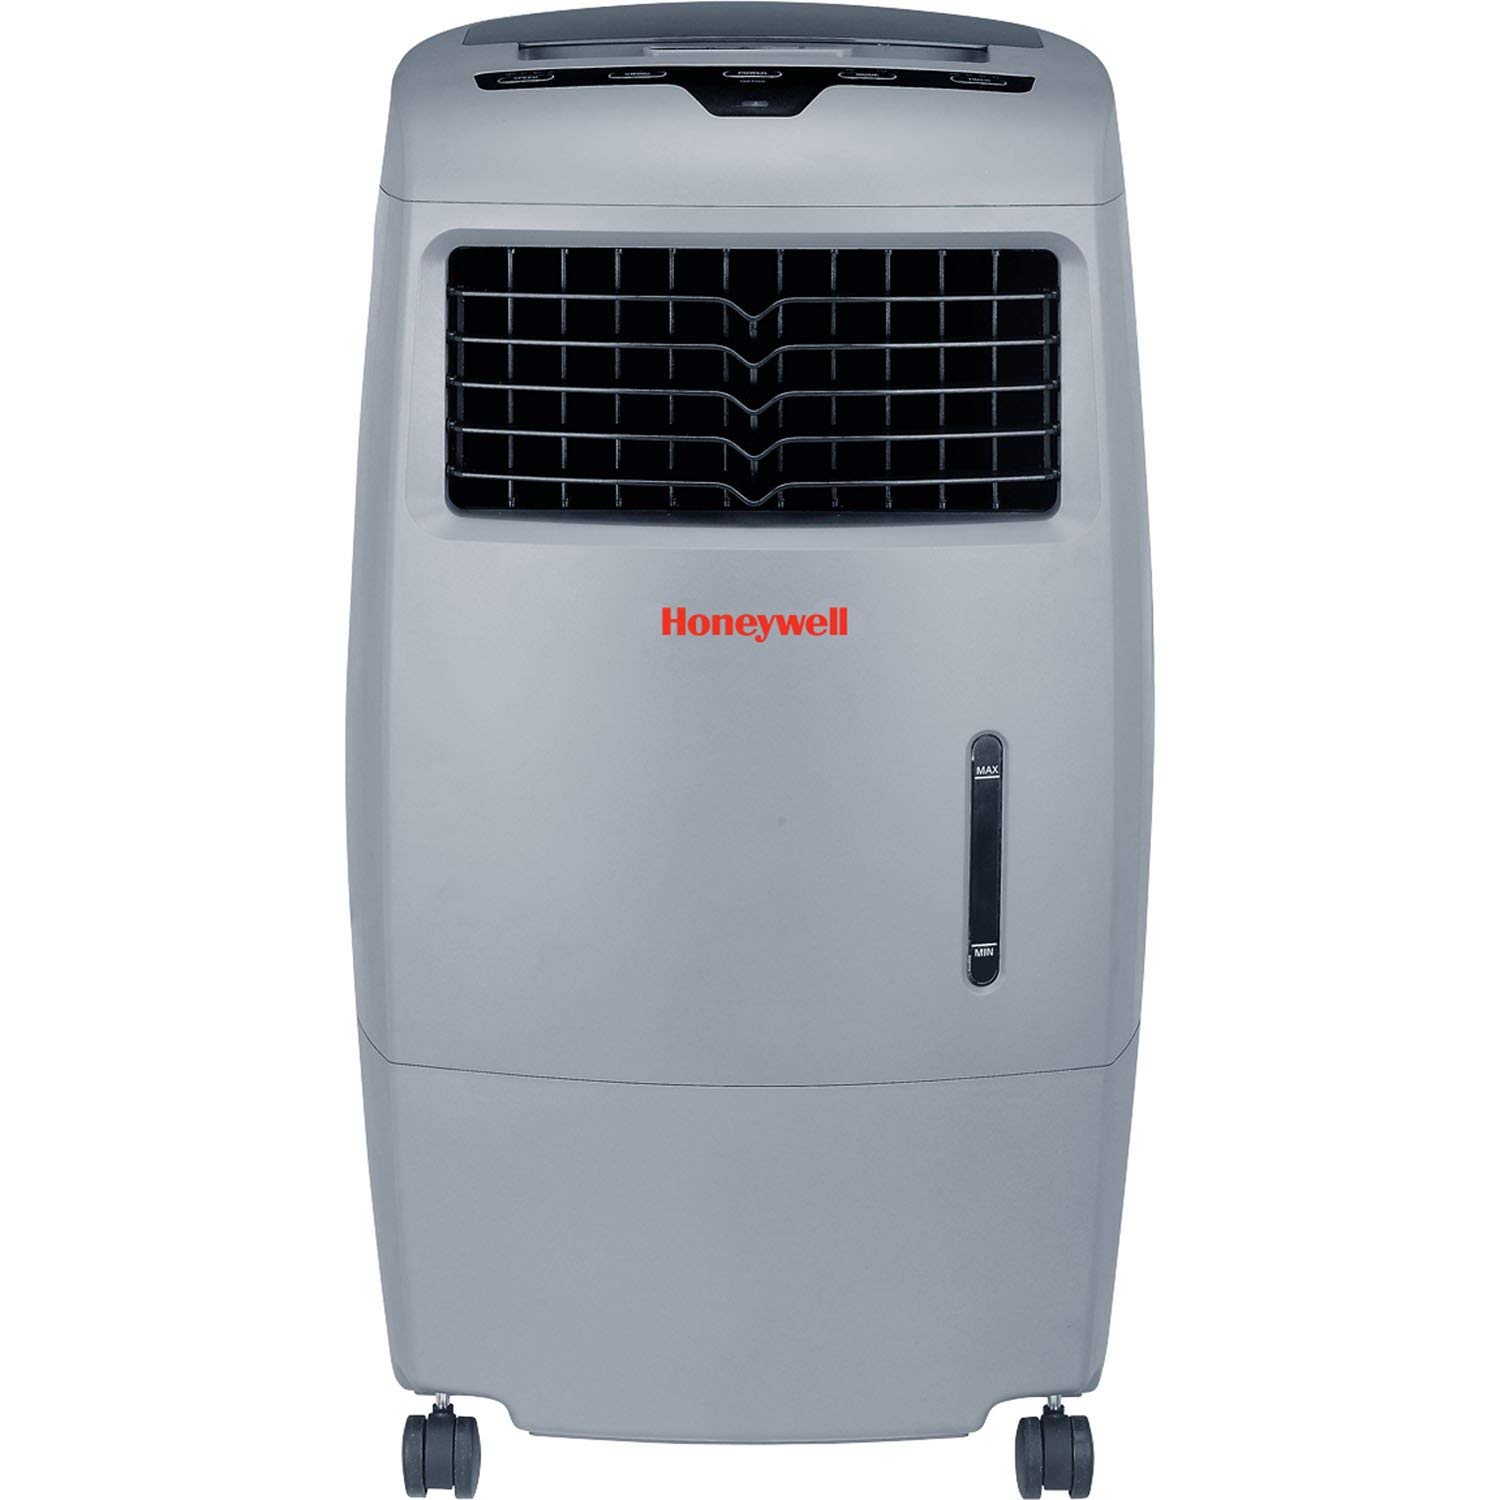 Honeywell 500 CFM Indoor Outdoor Portable Evaporative Cooler Fan & Humidifier, Washable Dust Filter & Remote Control, CO25AE